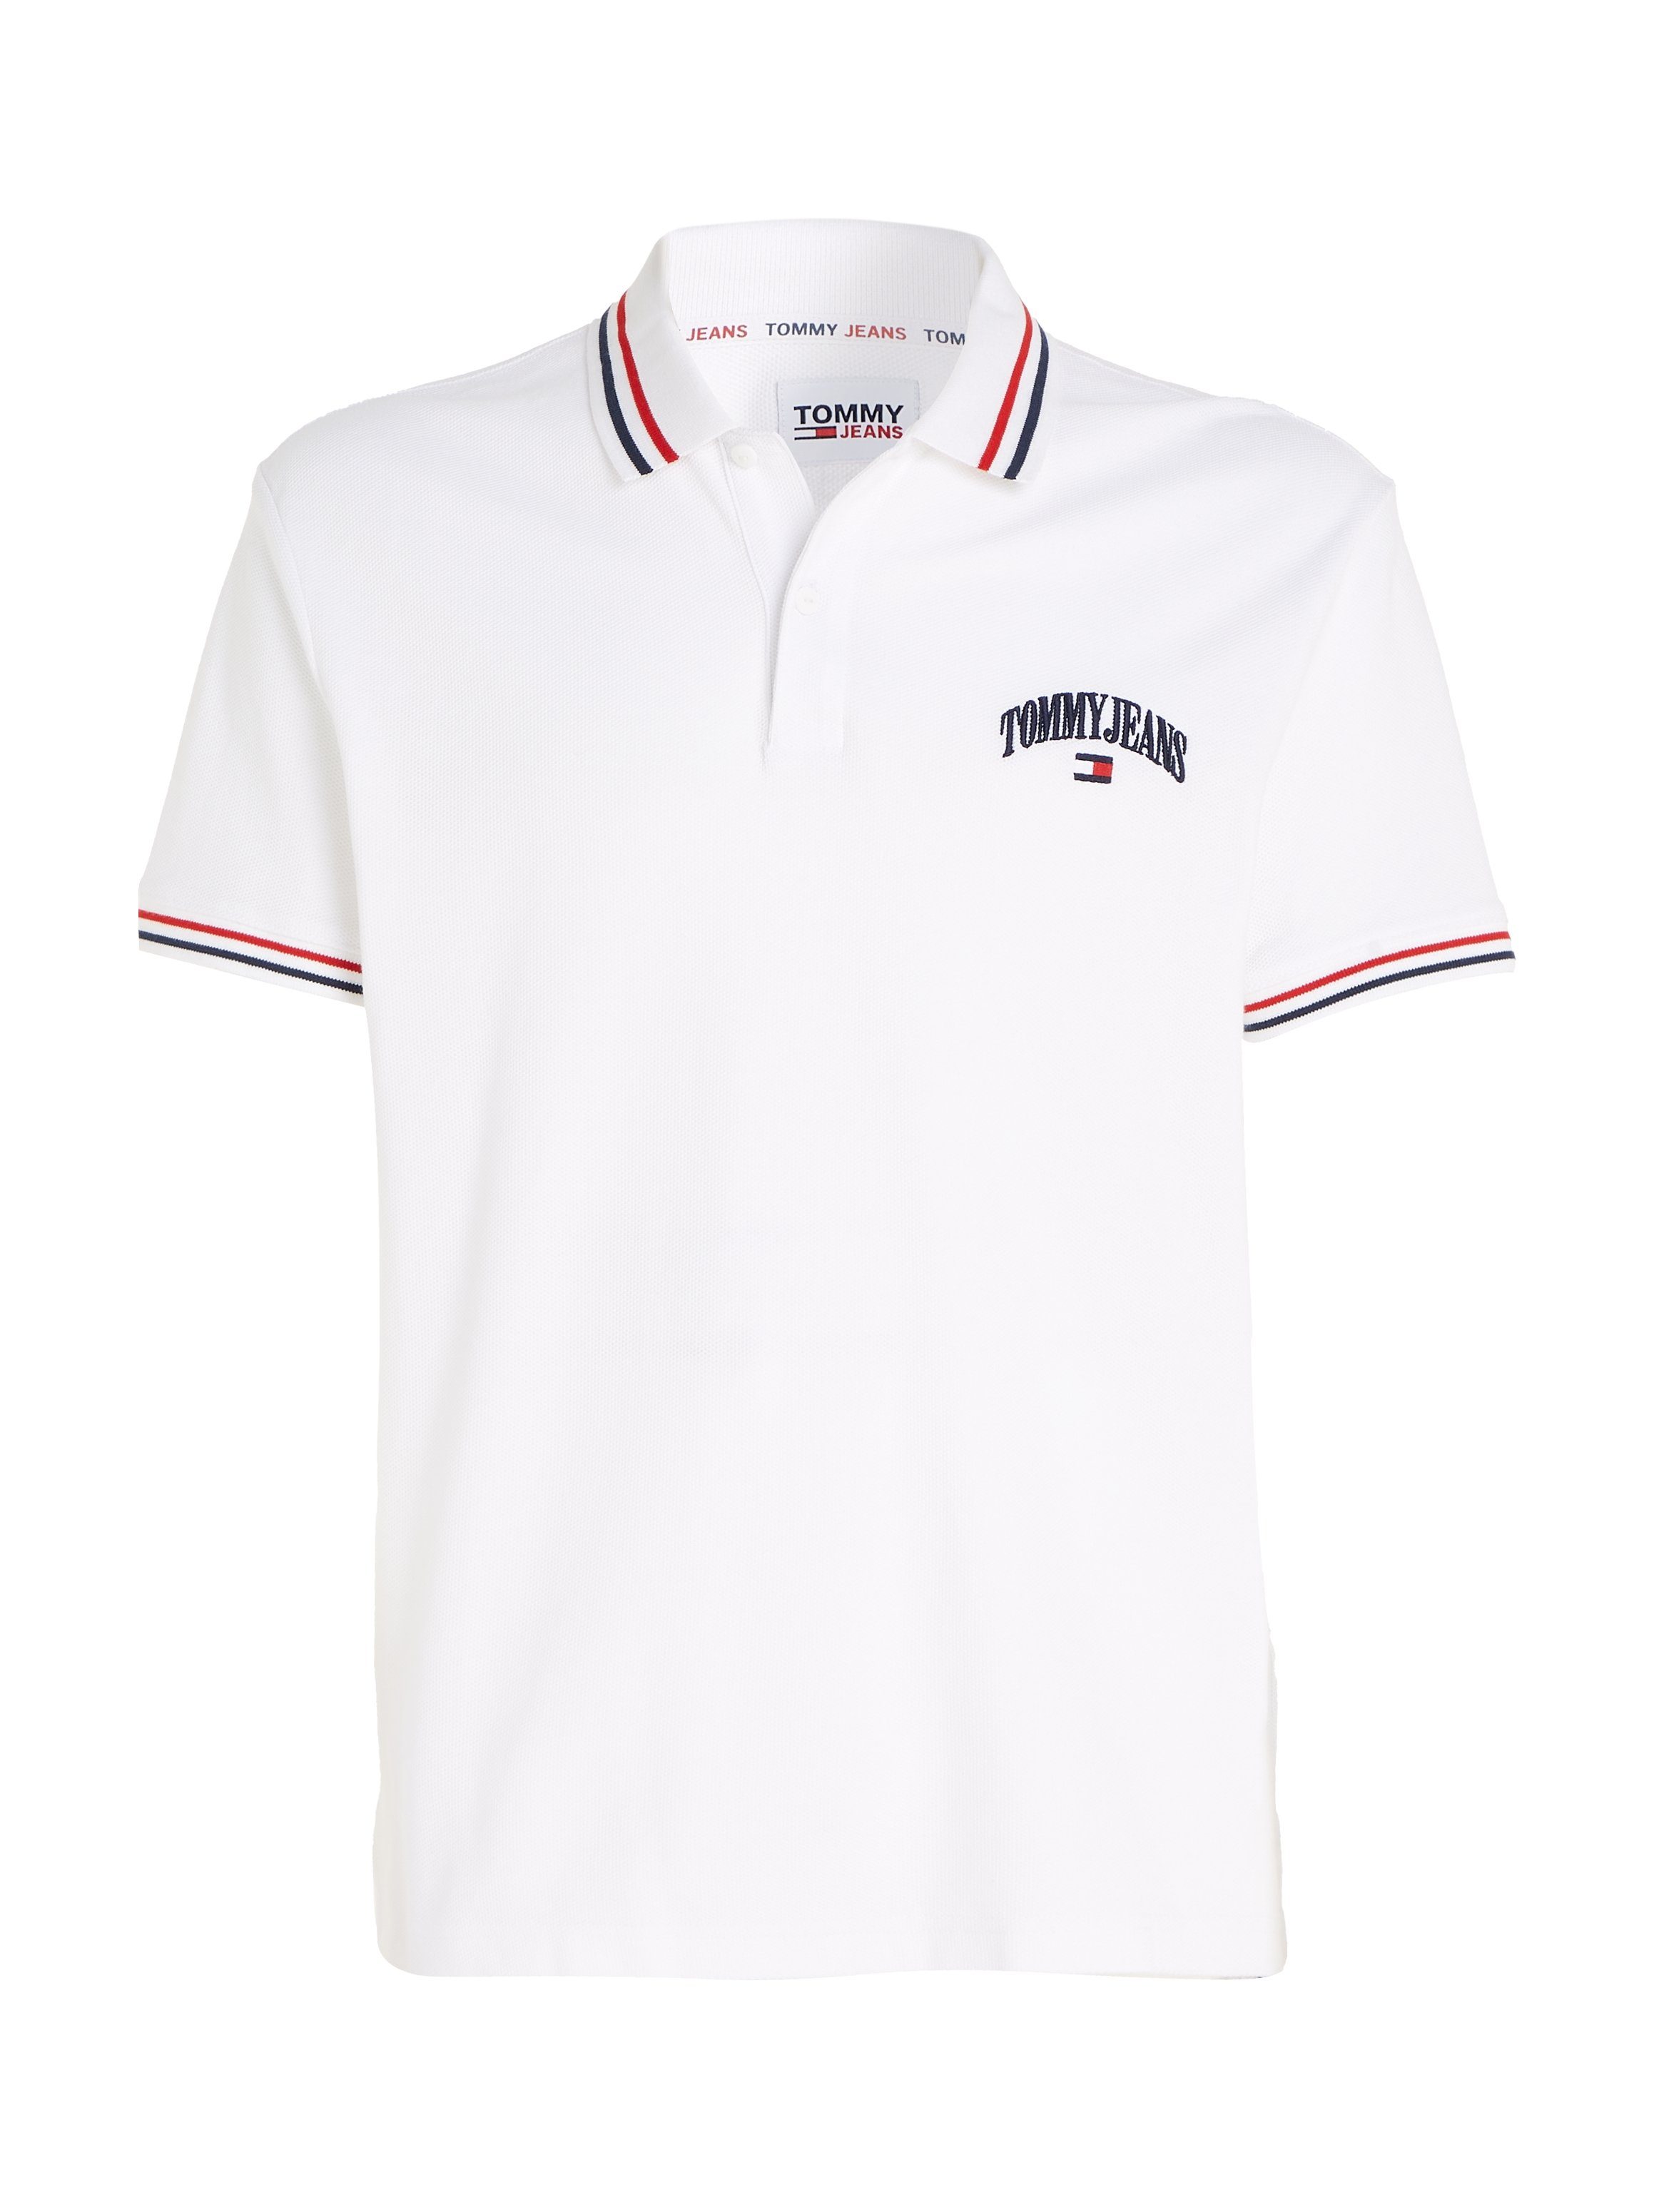 White CLSC Jeans TJM GRAPHIC POLO Poloshirt TIPPED Tommy